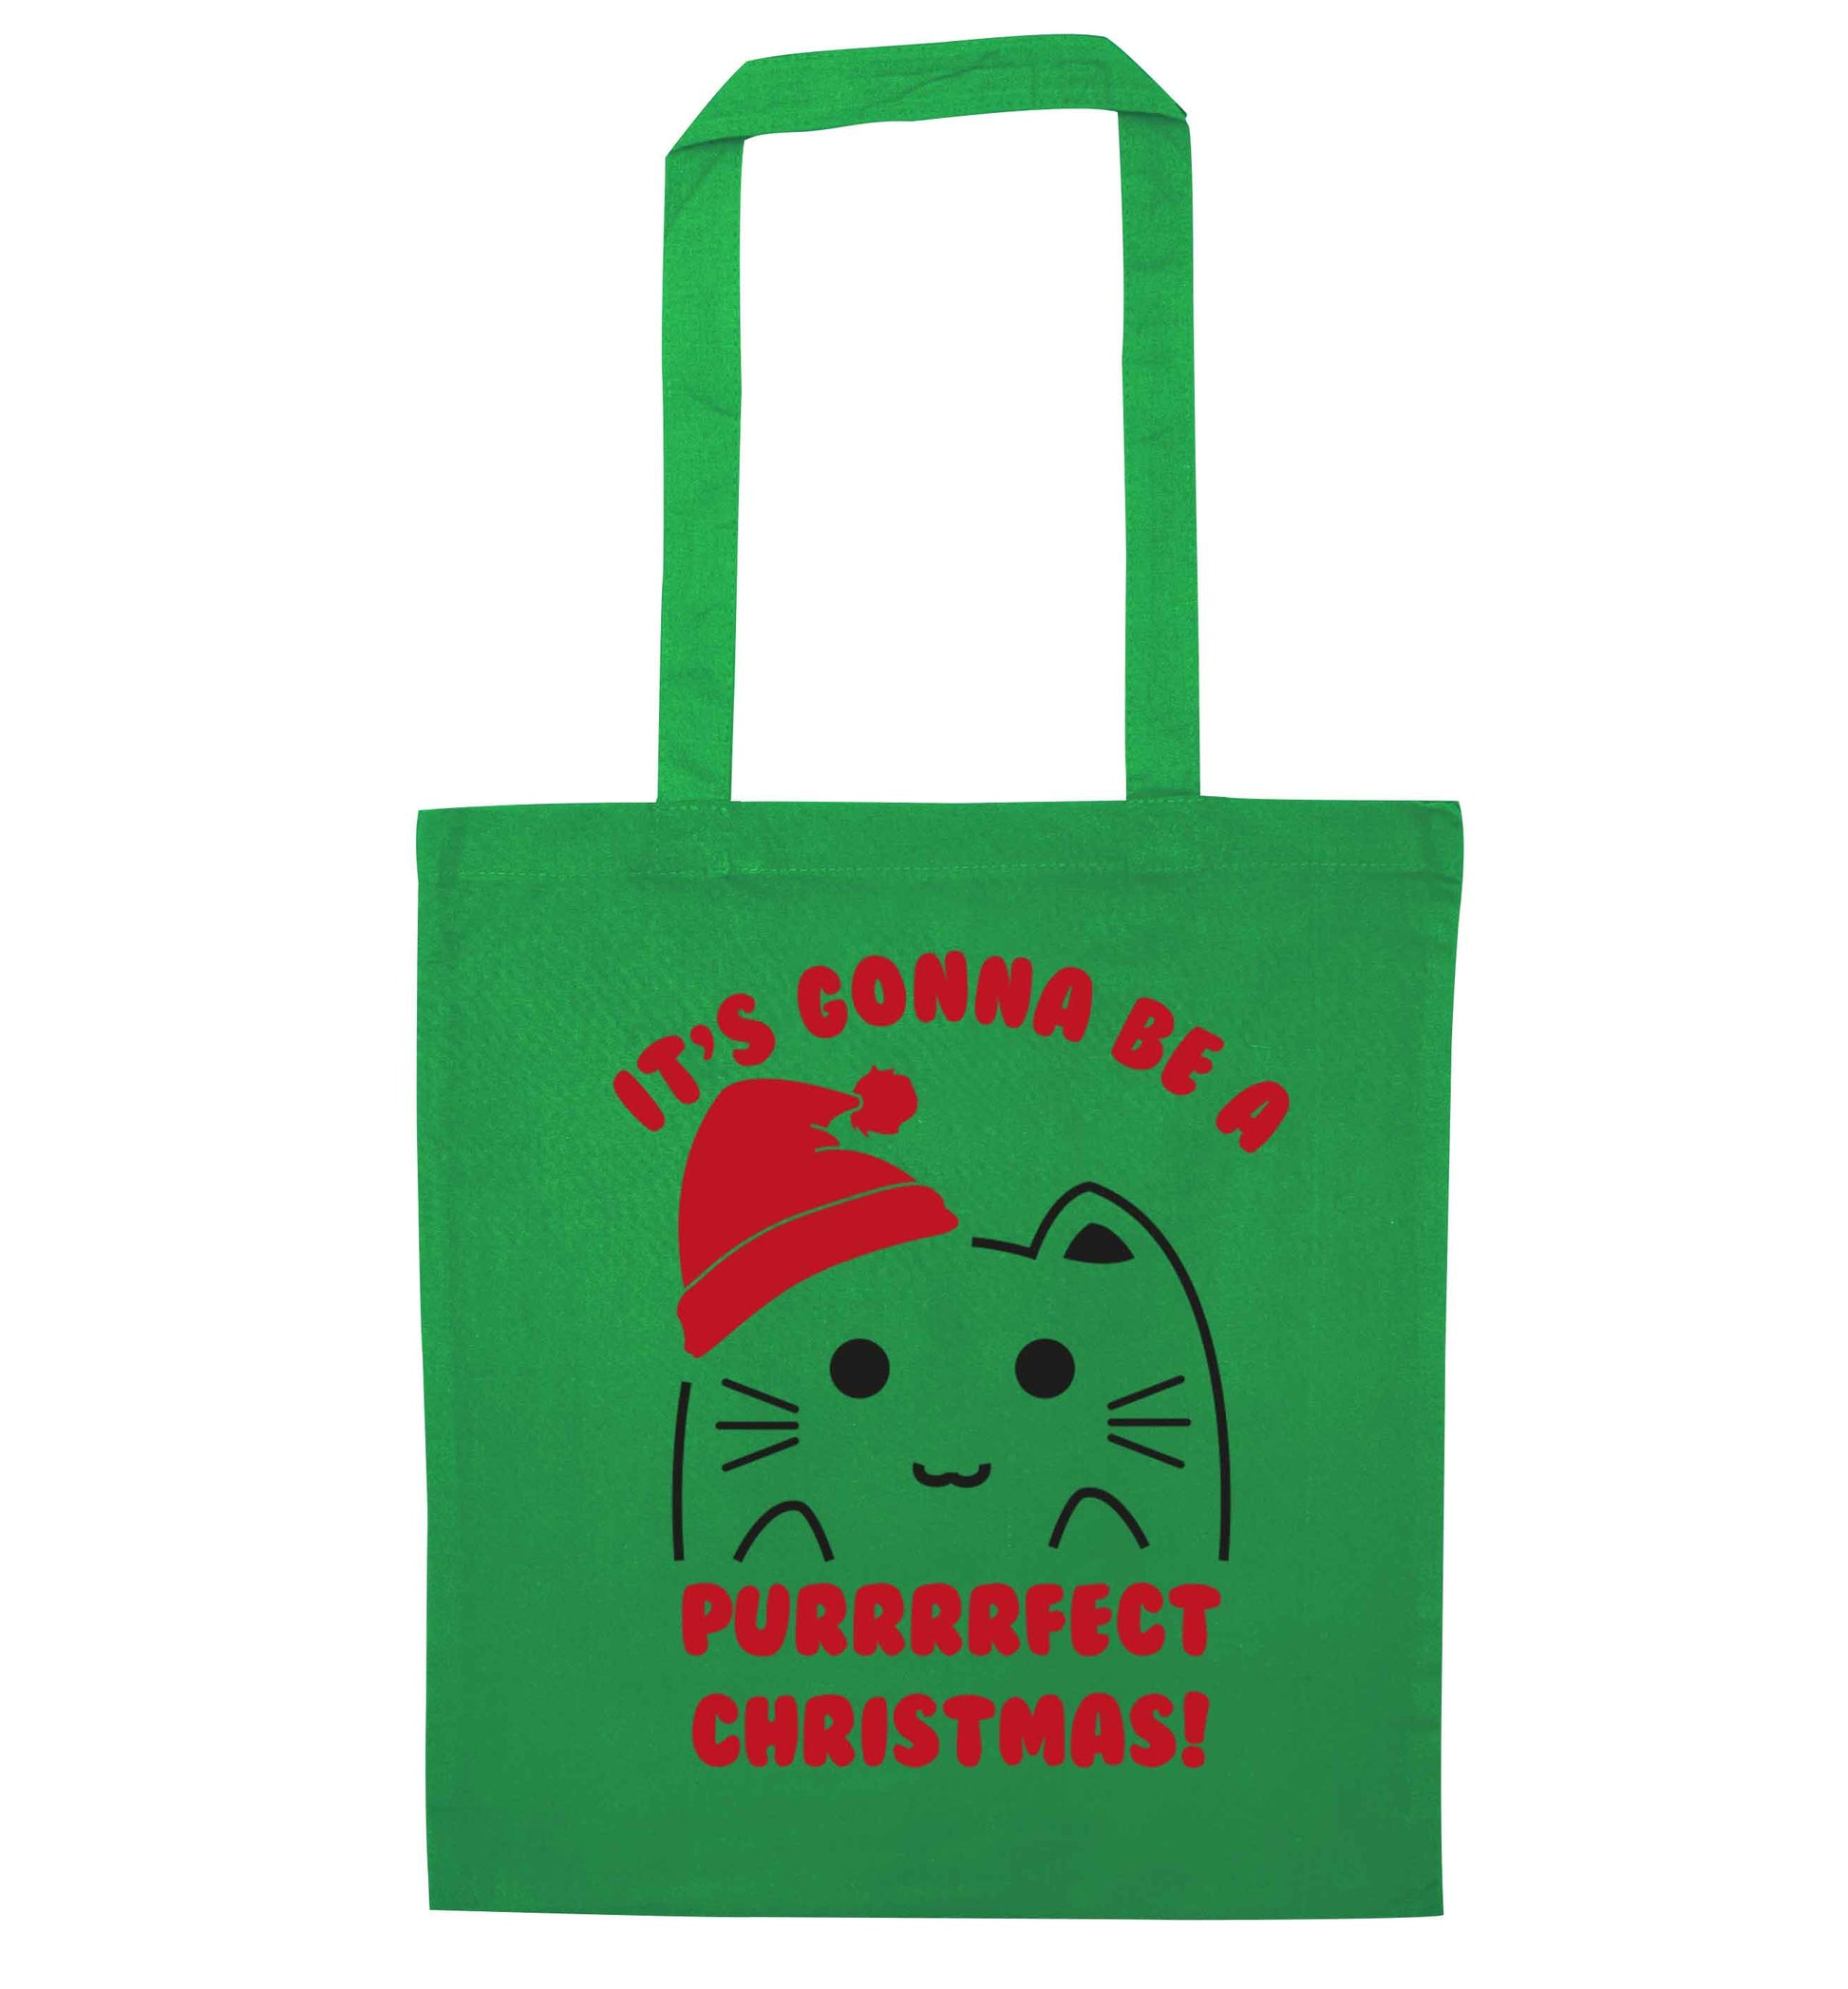 It's going to be a purrfect Christmas green tote bag